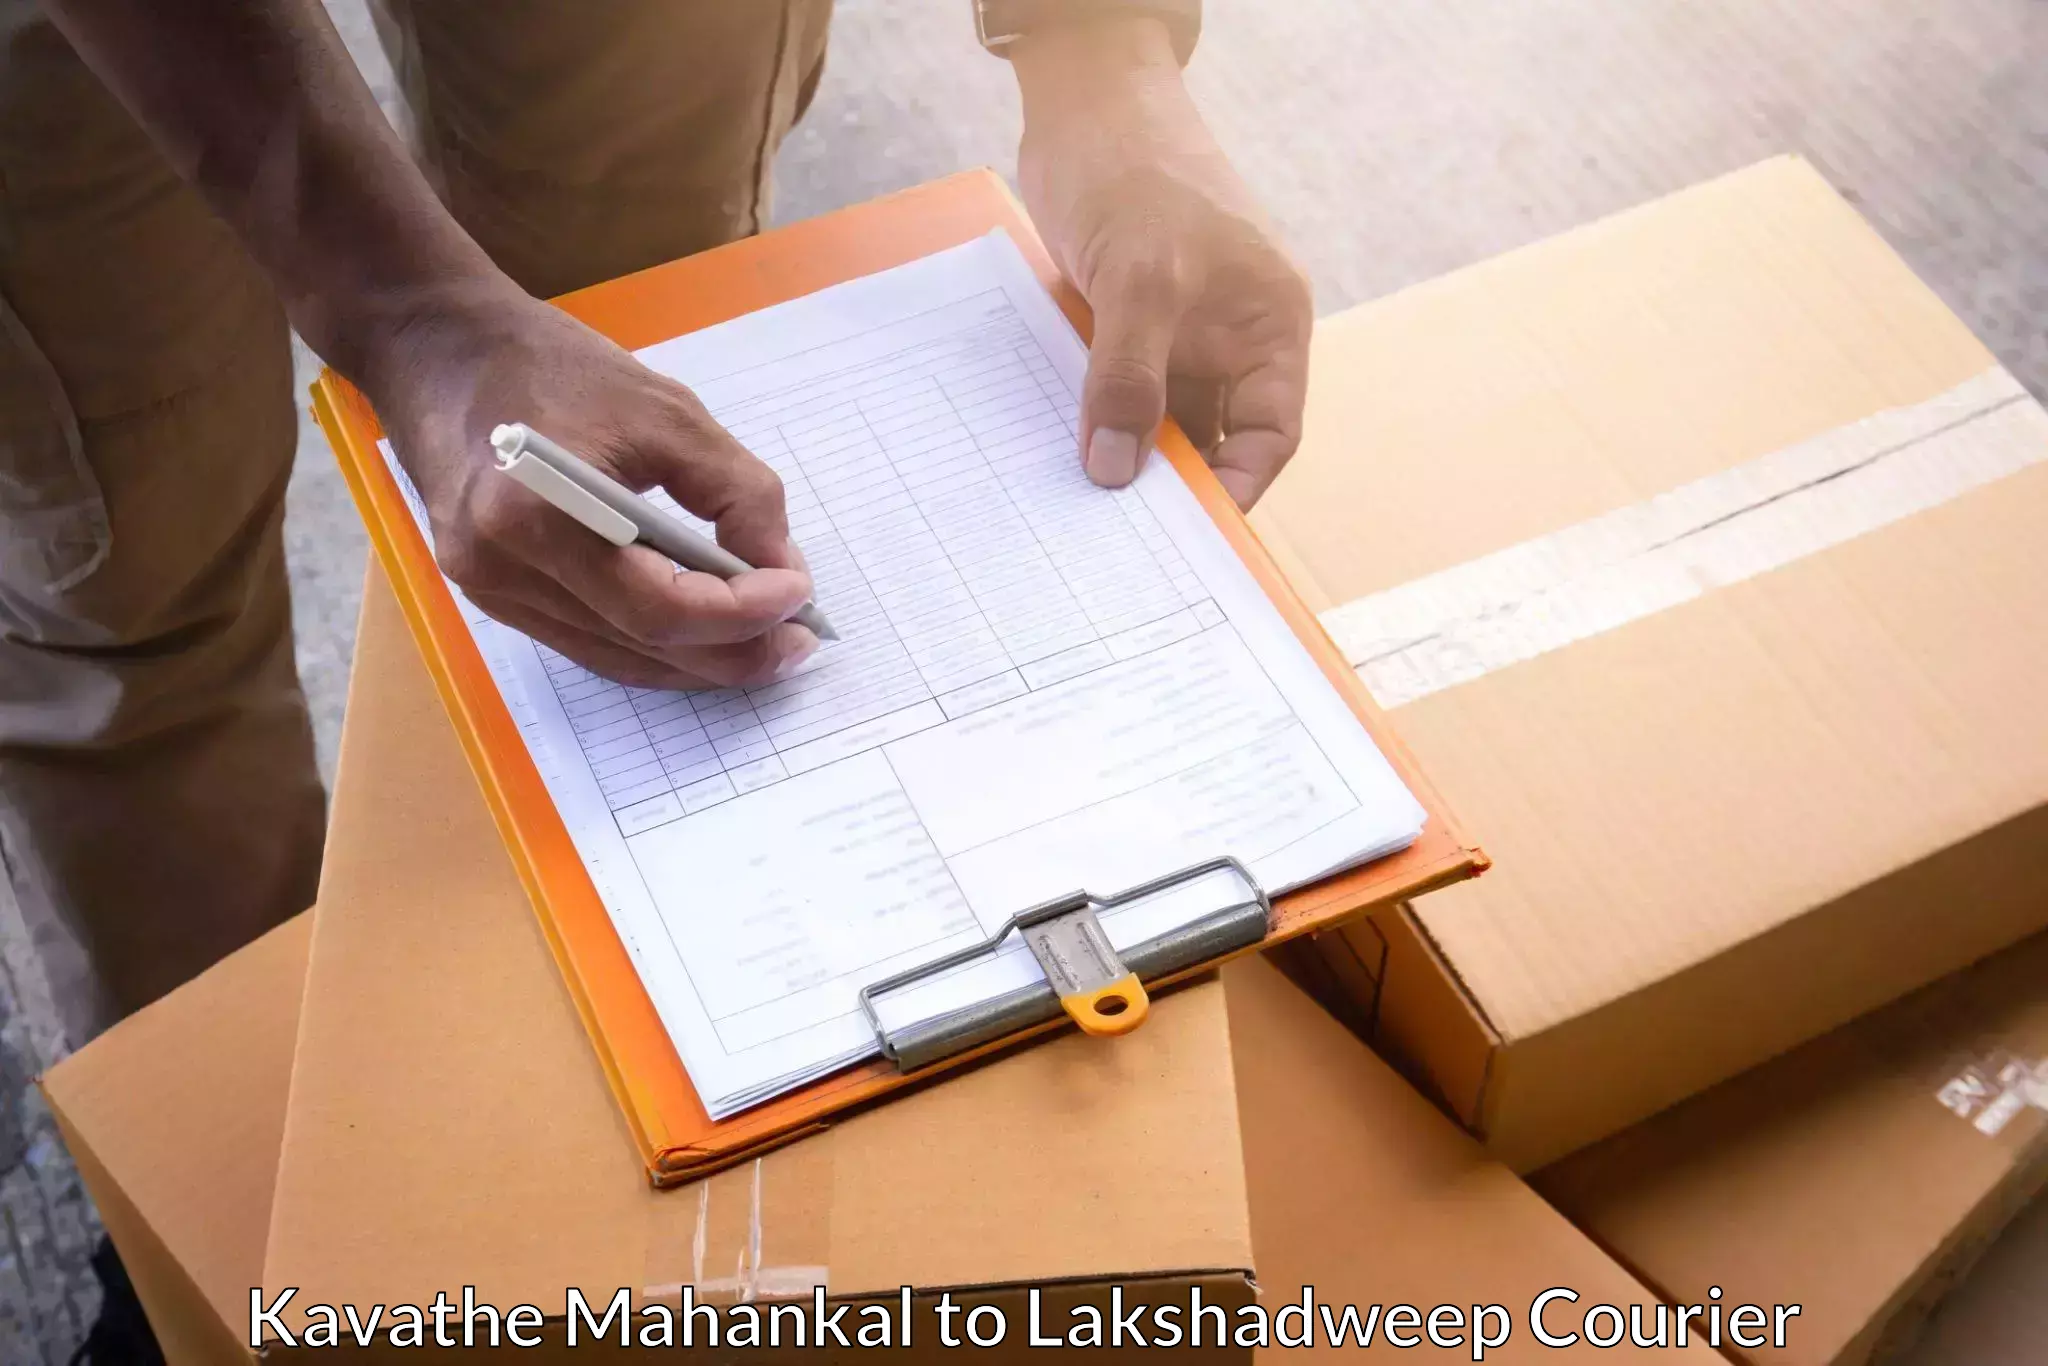 Supply chain delivery Kavathe Mahankal to Lakshadweep